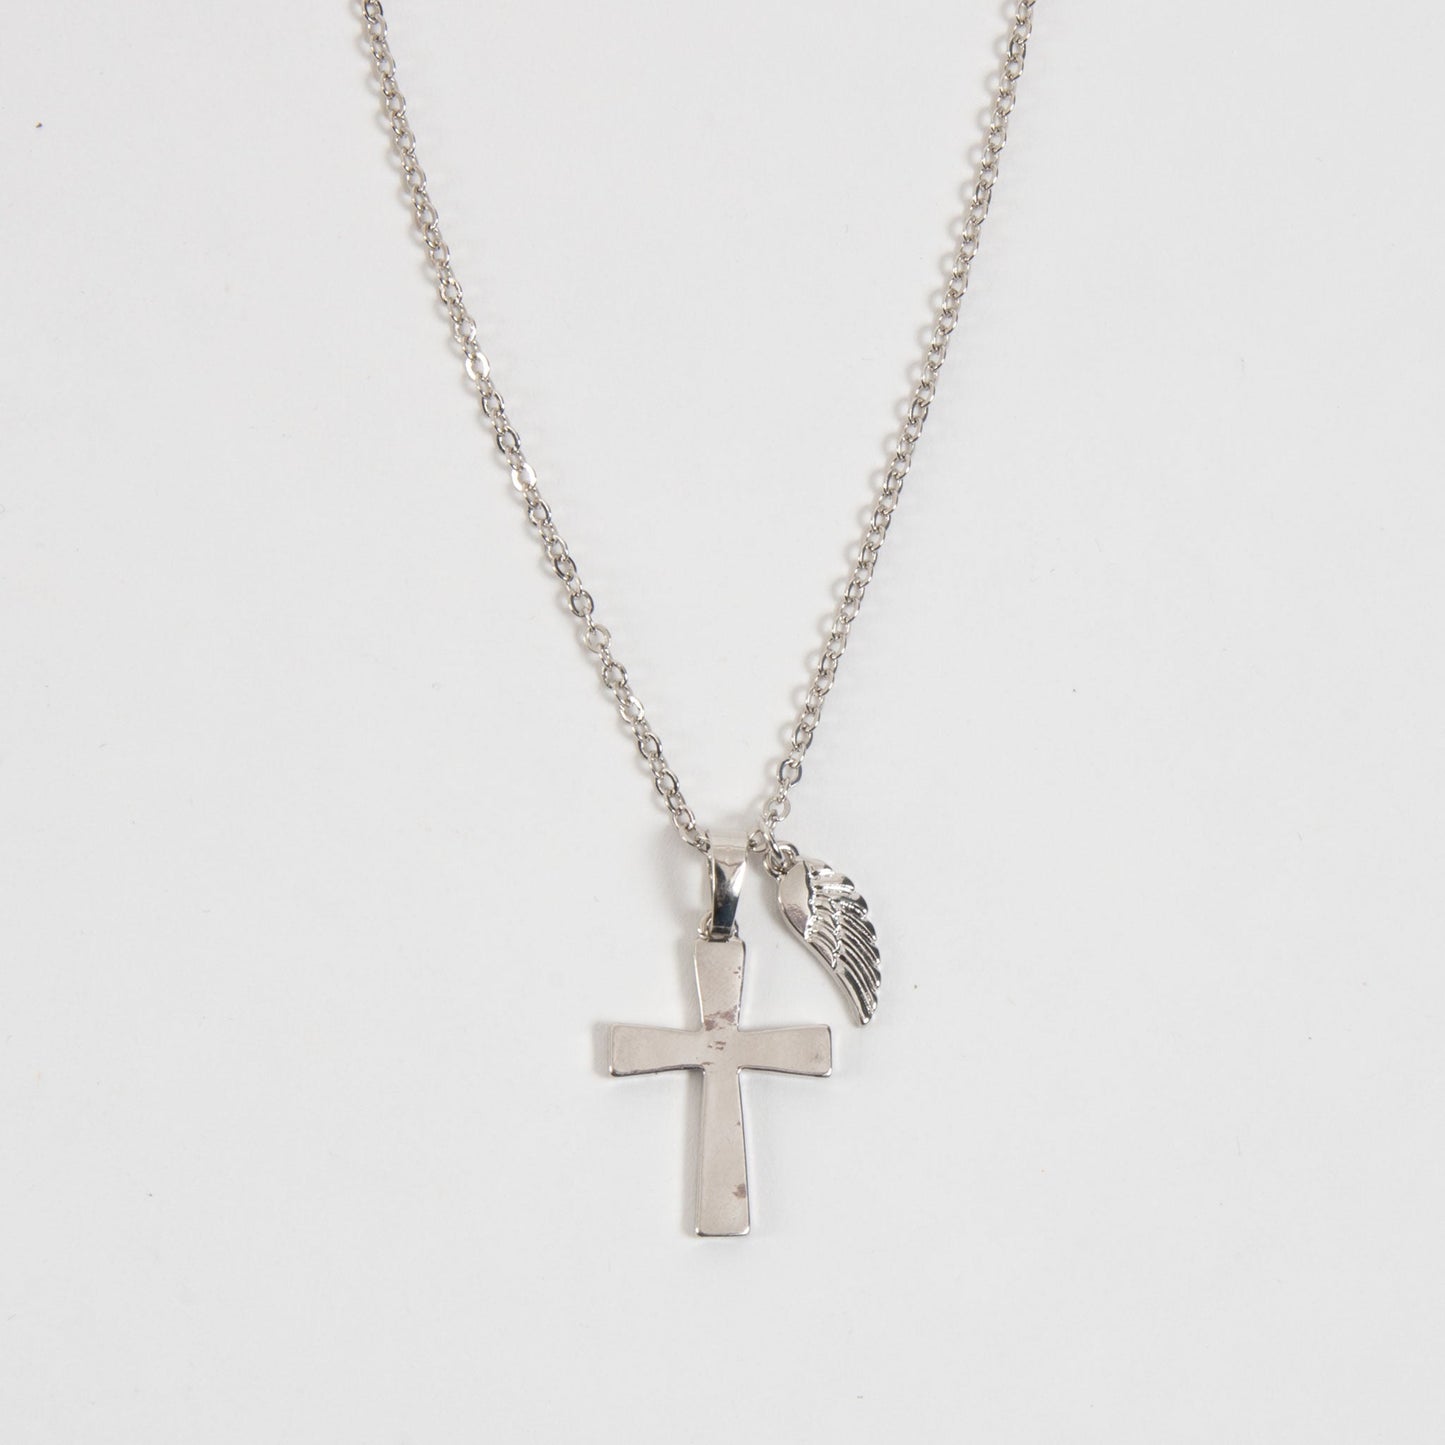 Carey Blessed Pendant Necklace